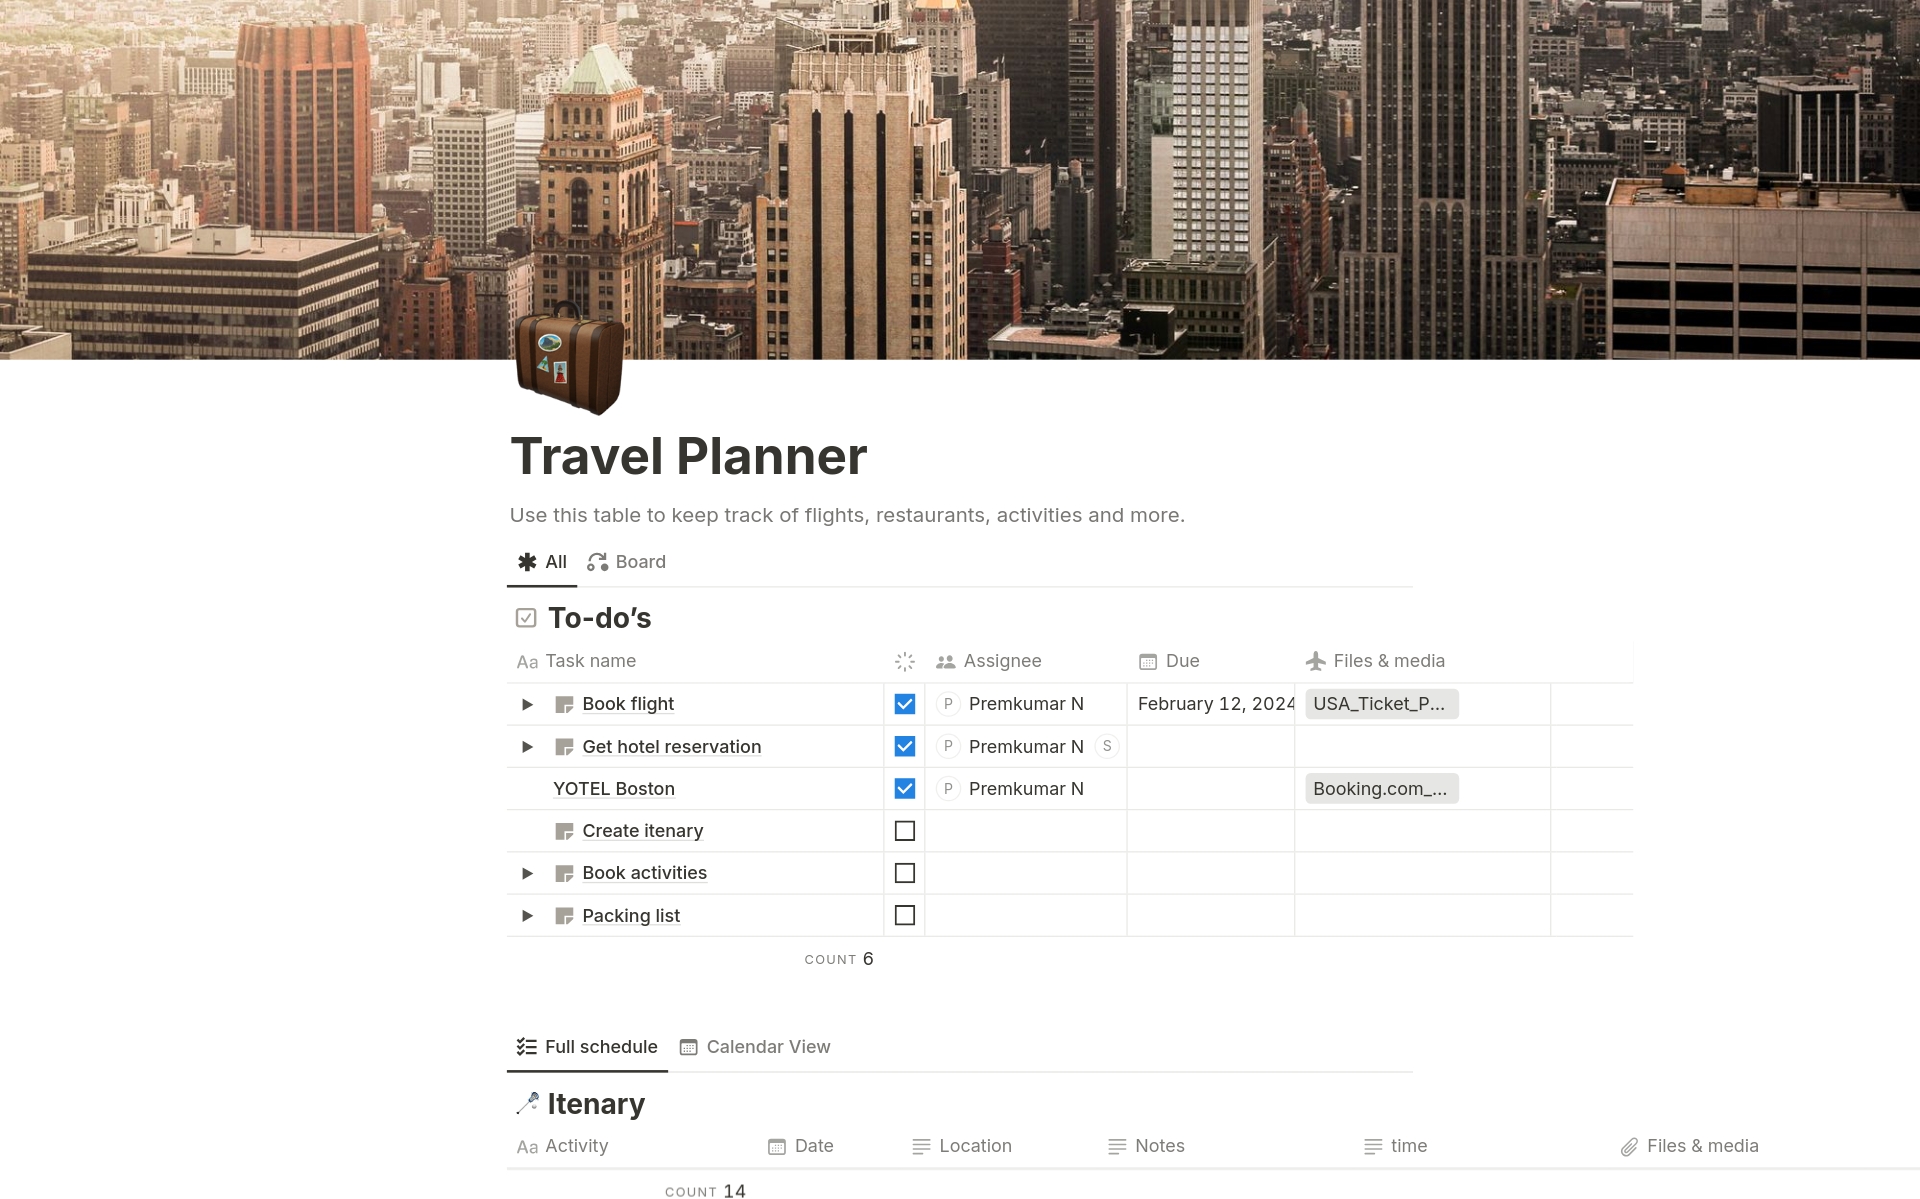 A template preview for Travel Planner - USA